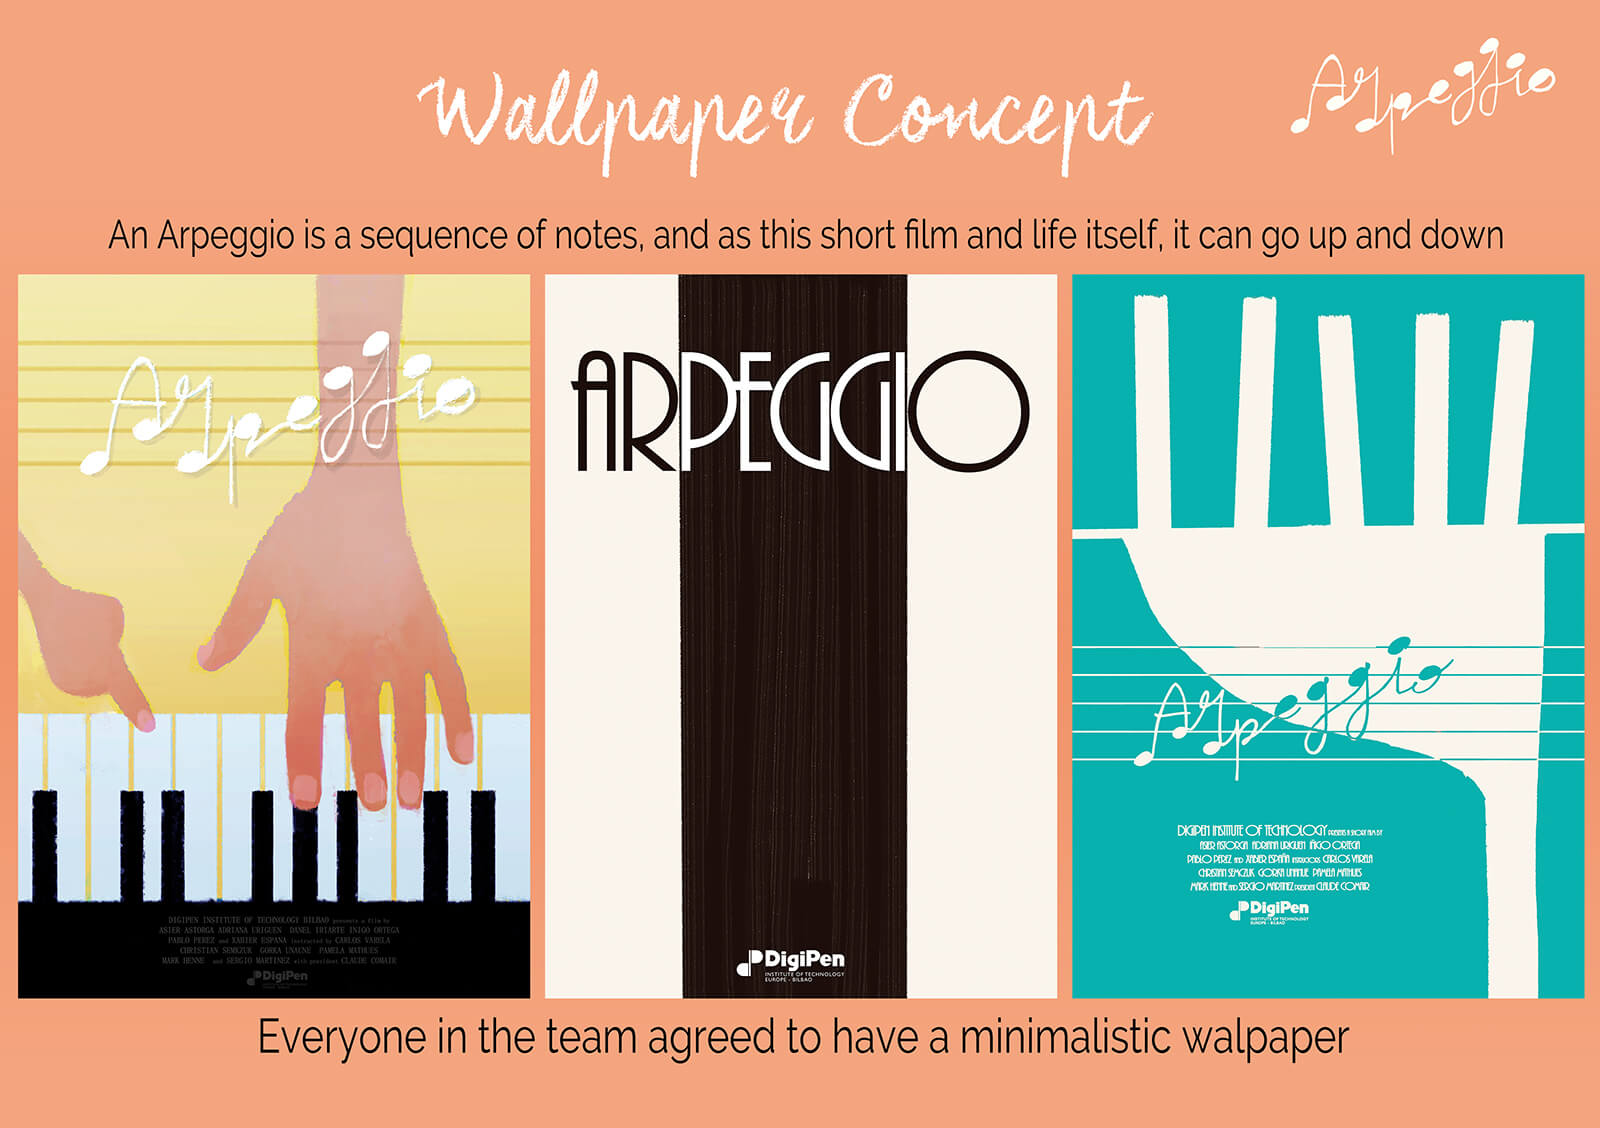 Wallpaper/Poster concept designs for the film Arpeggio, incorporating stylized scripts and depictions of piano keys